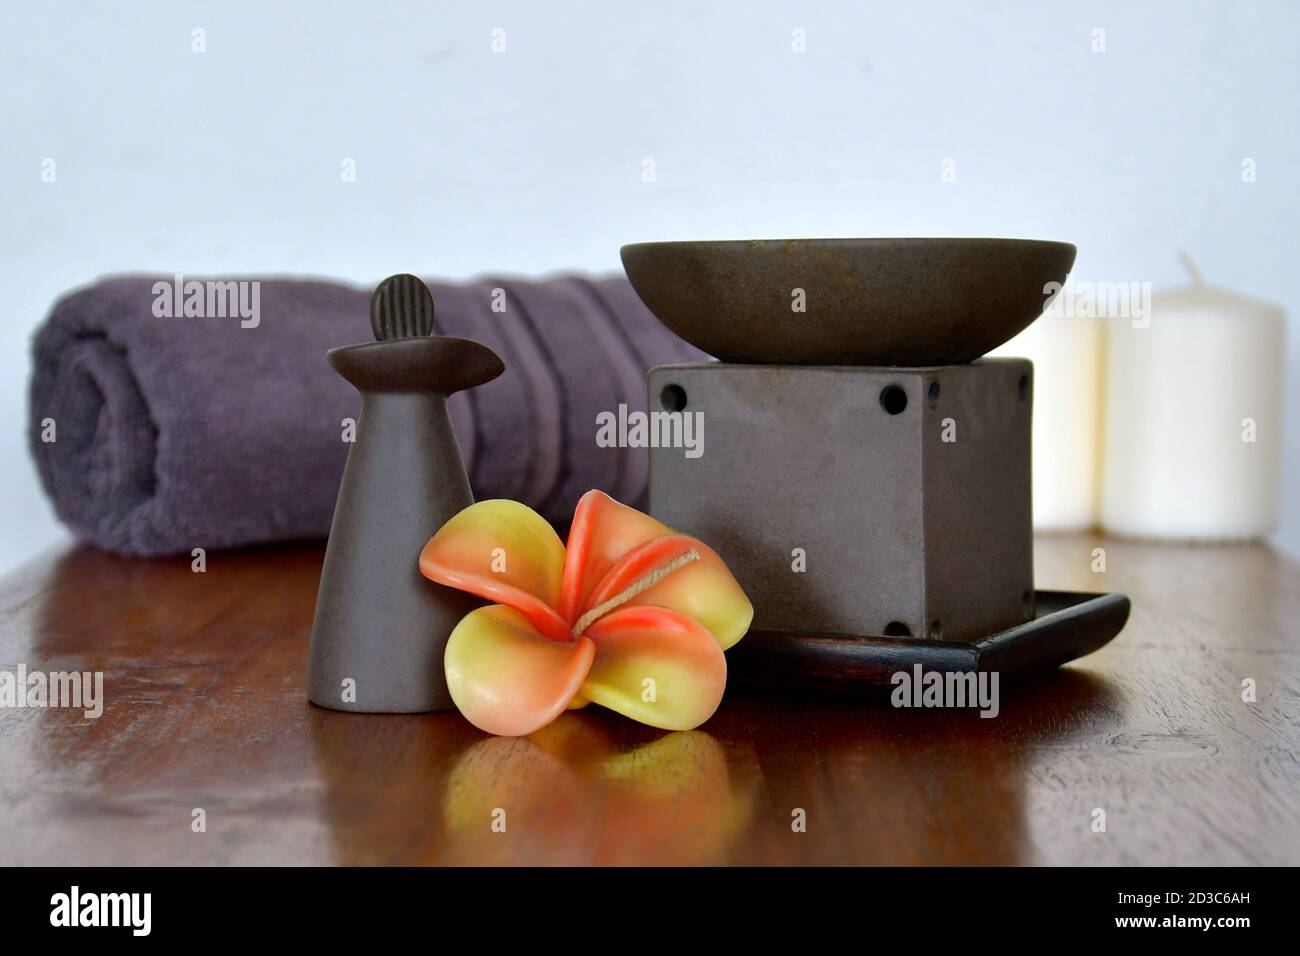 Aromatherapy oil burner and clay bottle in a luxurious spa setting with frangipani flowers. Stock Photo